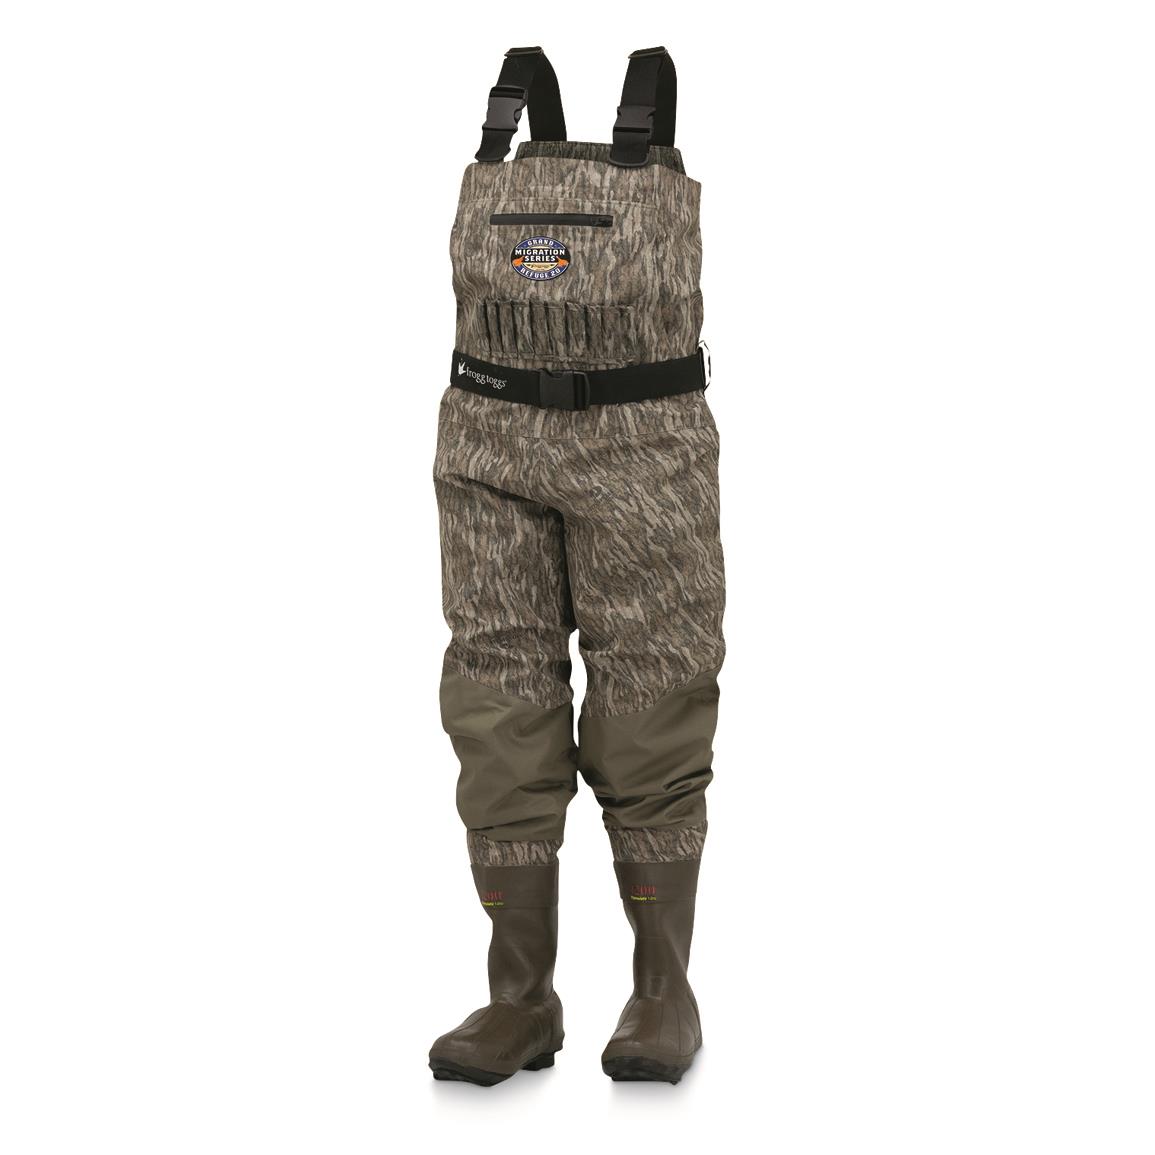 Frogg Toggs Grand Refuge 2.0 Breathable Insulated Chest Waders, Stout Sizes